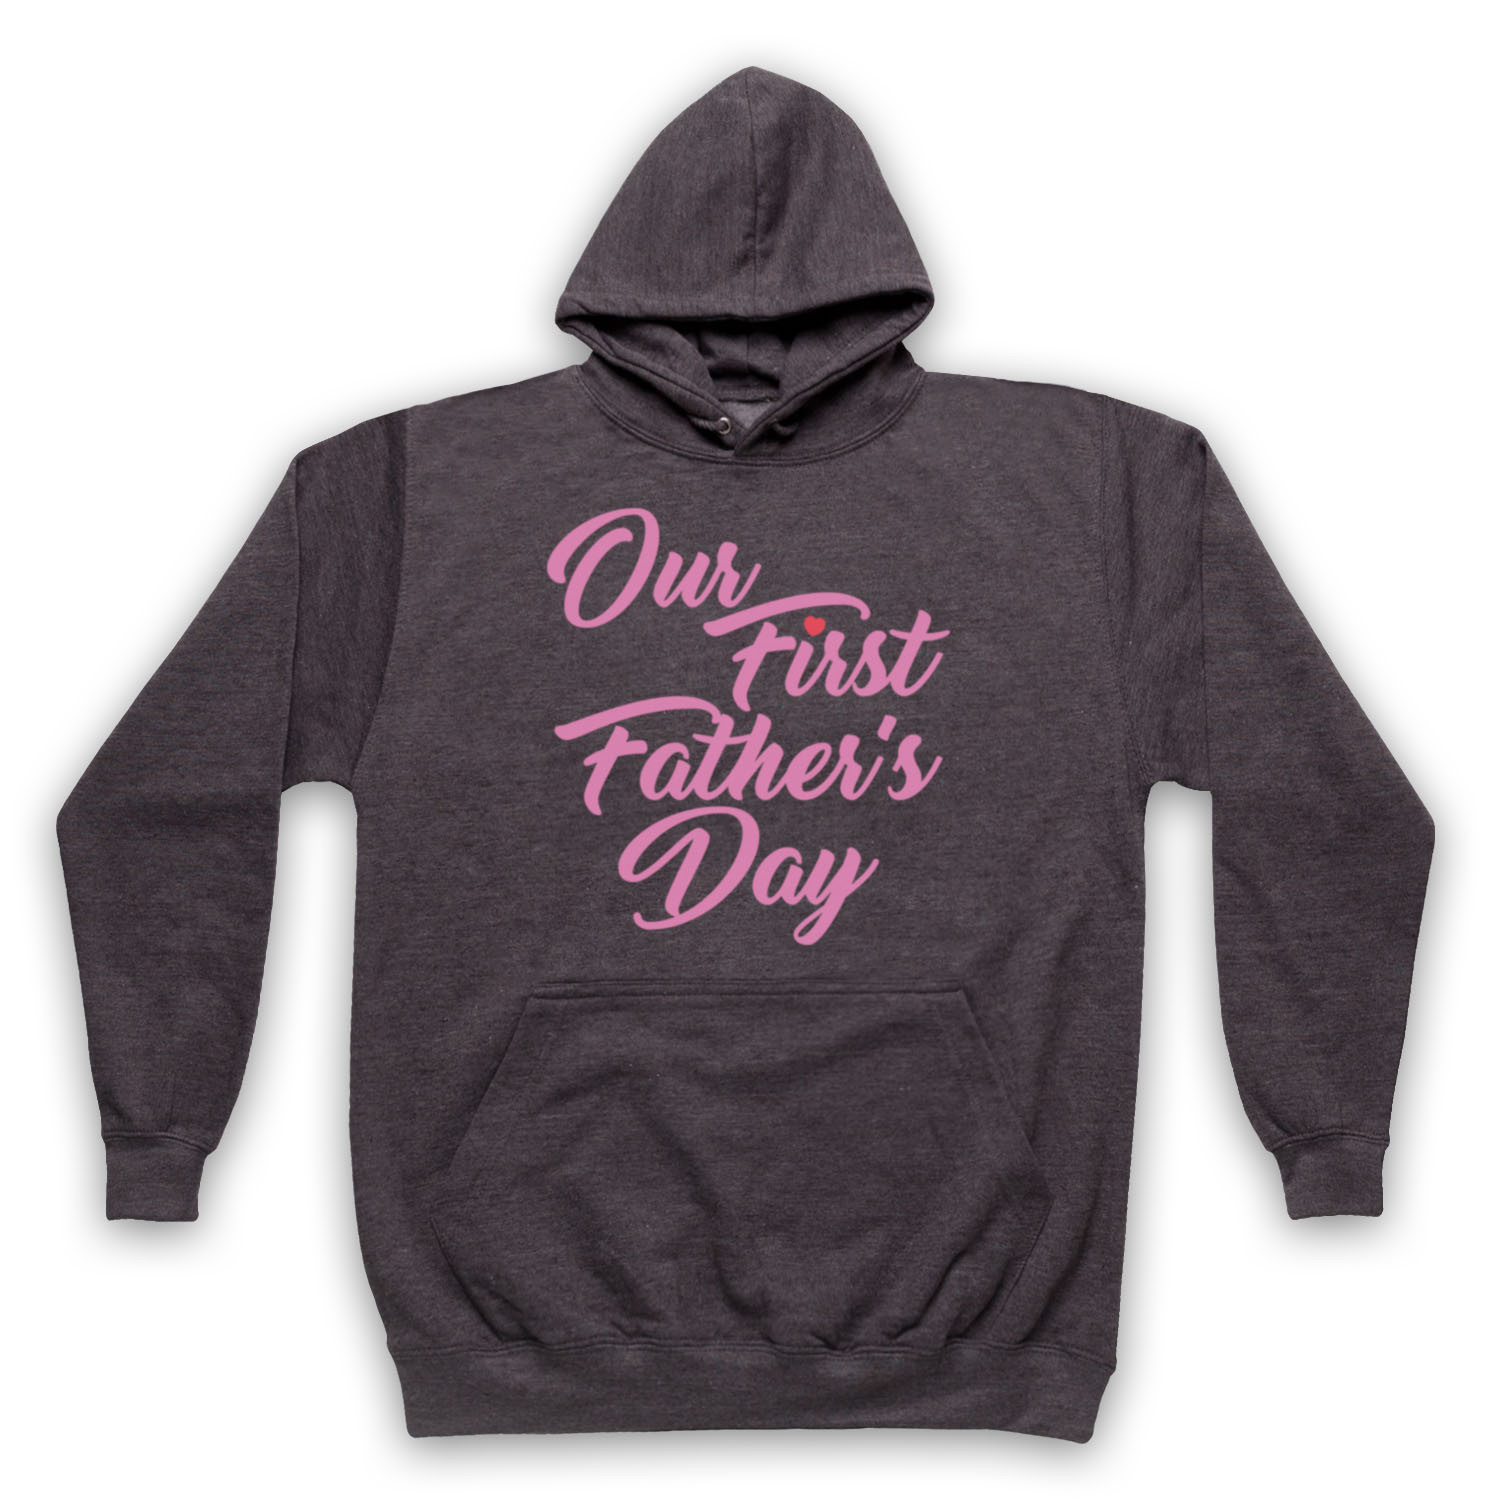 Father'S Day Gifts From Kids
 OUR FIRST FATHER S DAY BABY DAUGHTER COOL CUTE GIFT ADULTS